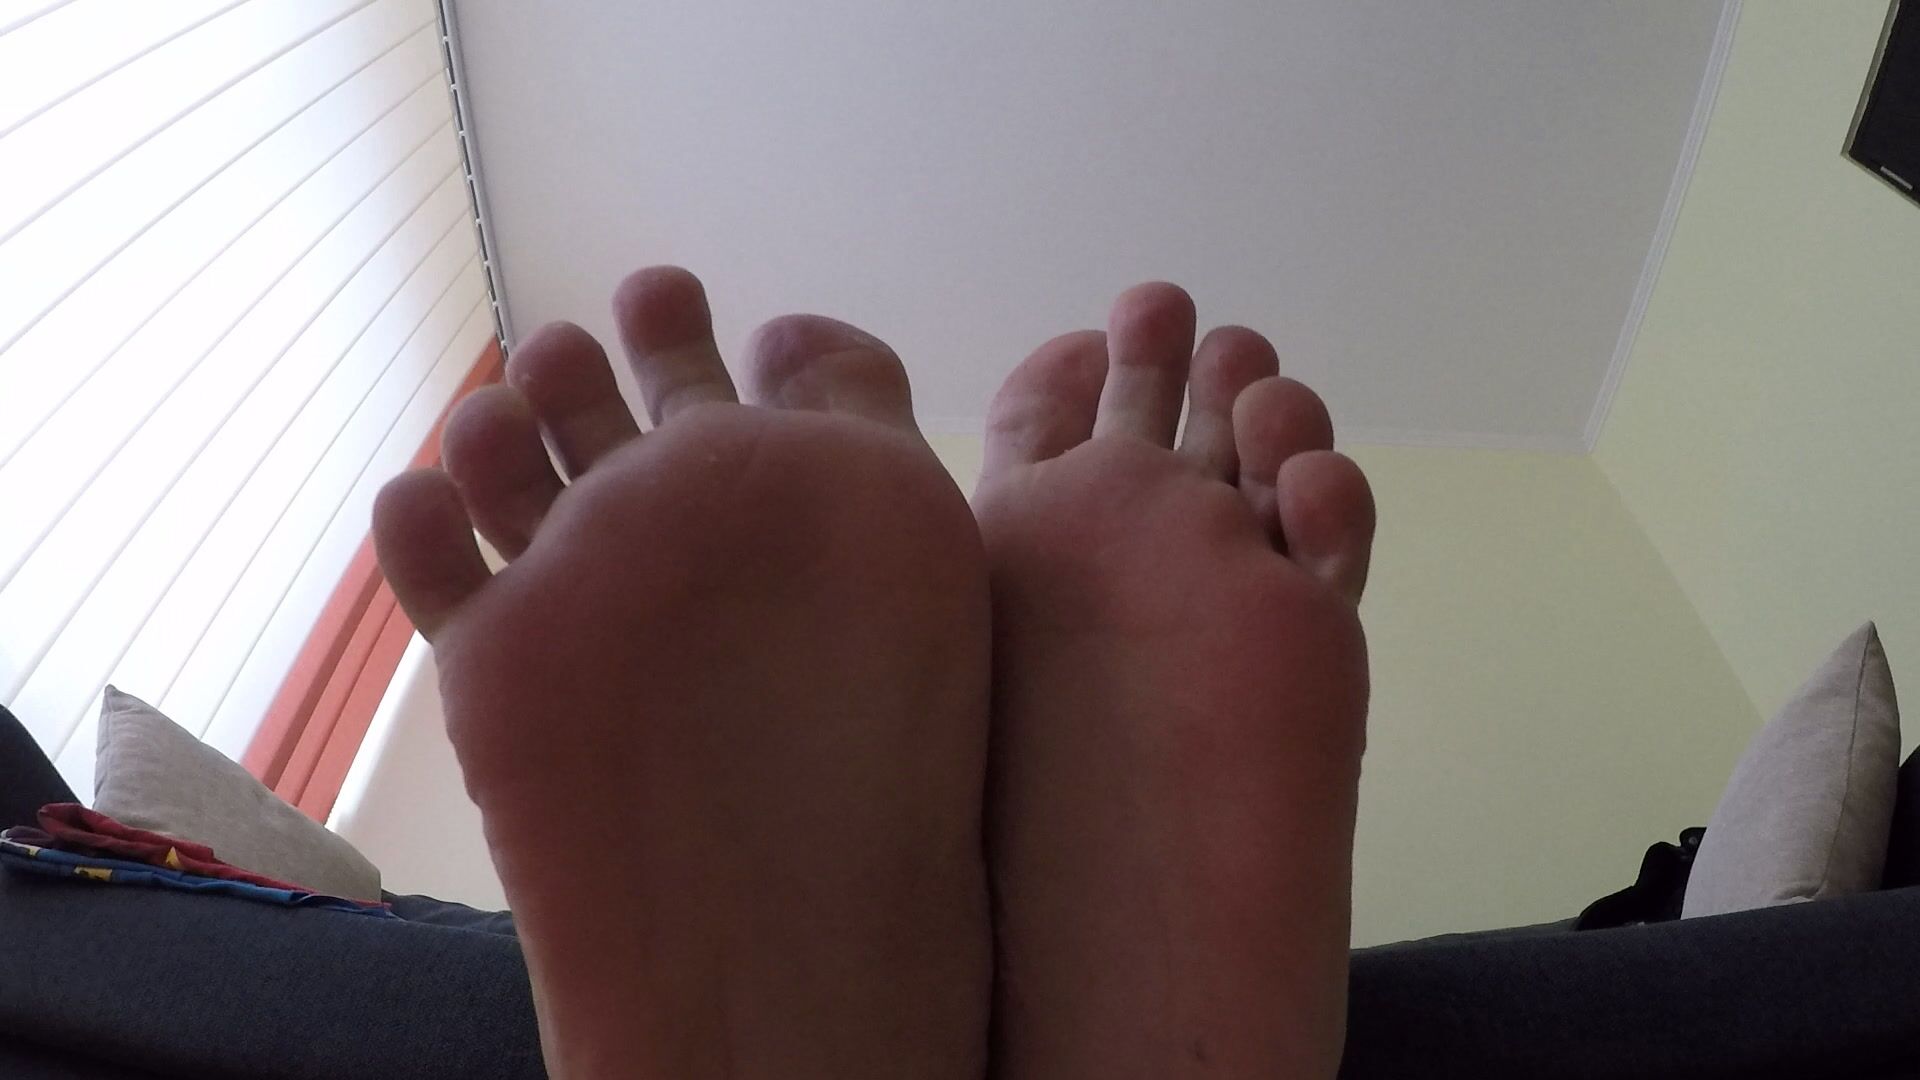 Foot fetish, close-up of my toes, colored socks and dirty talking.